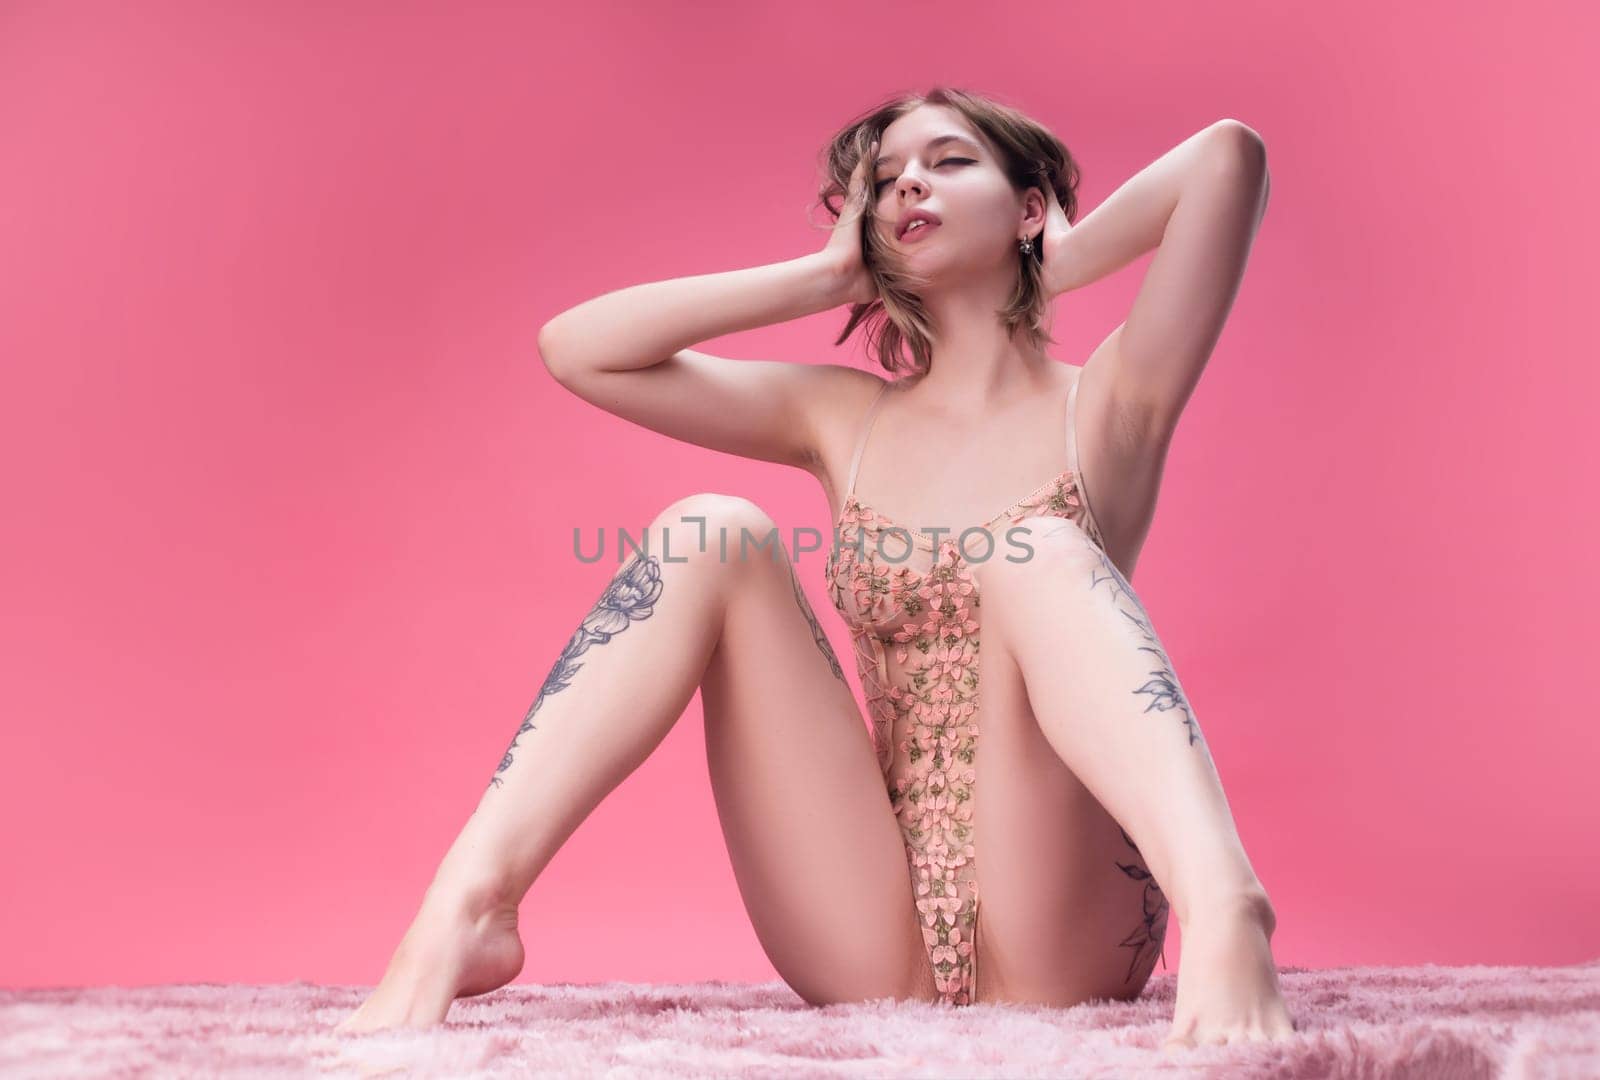 hot girl in beautiful lingerie on a pink background posing sexually freely emotionally by Rotozey